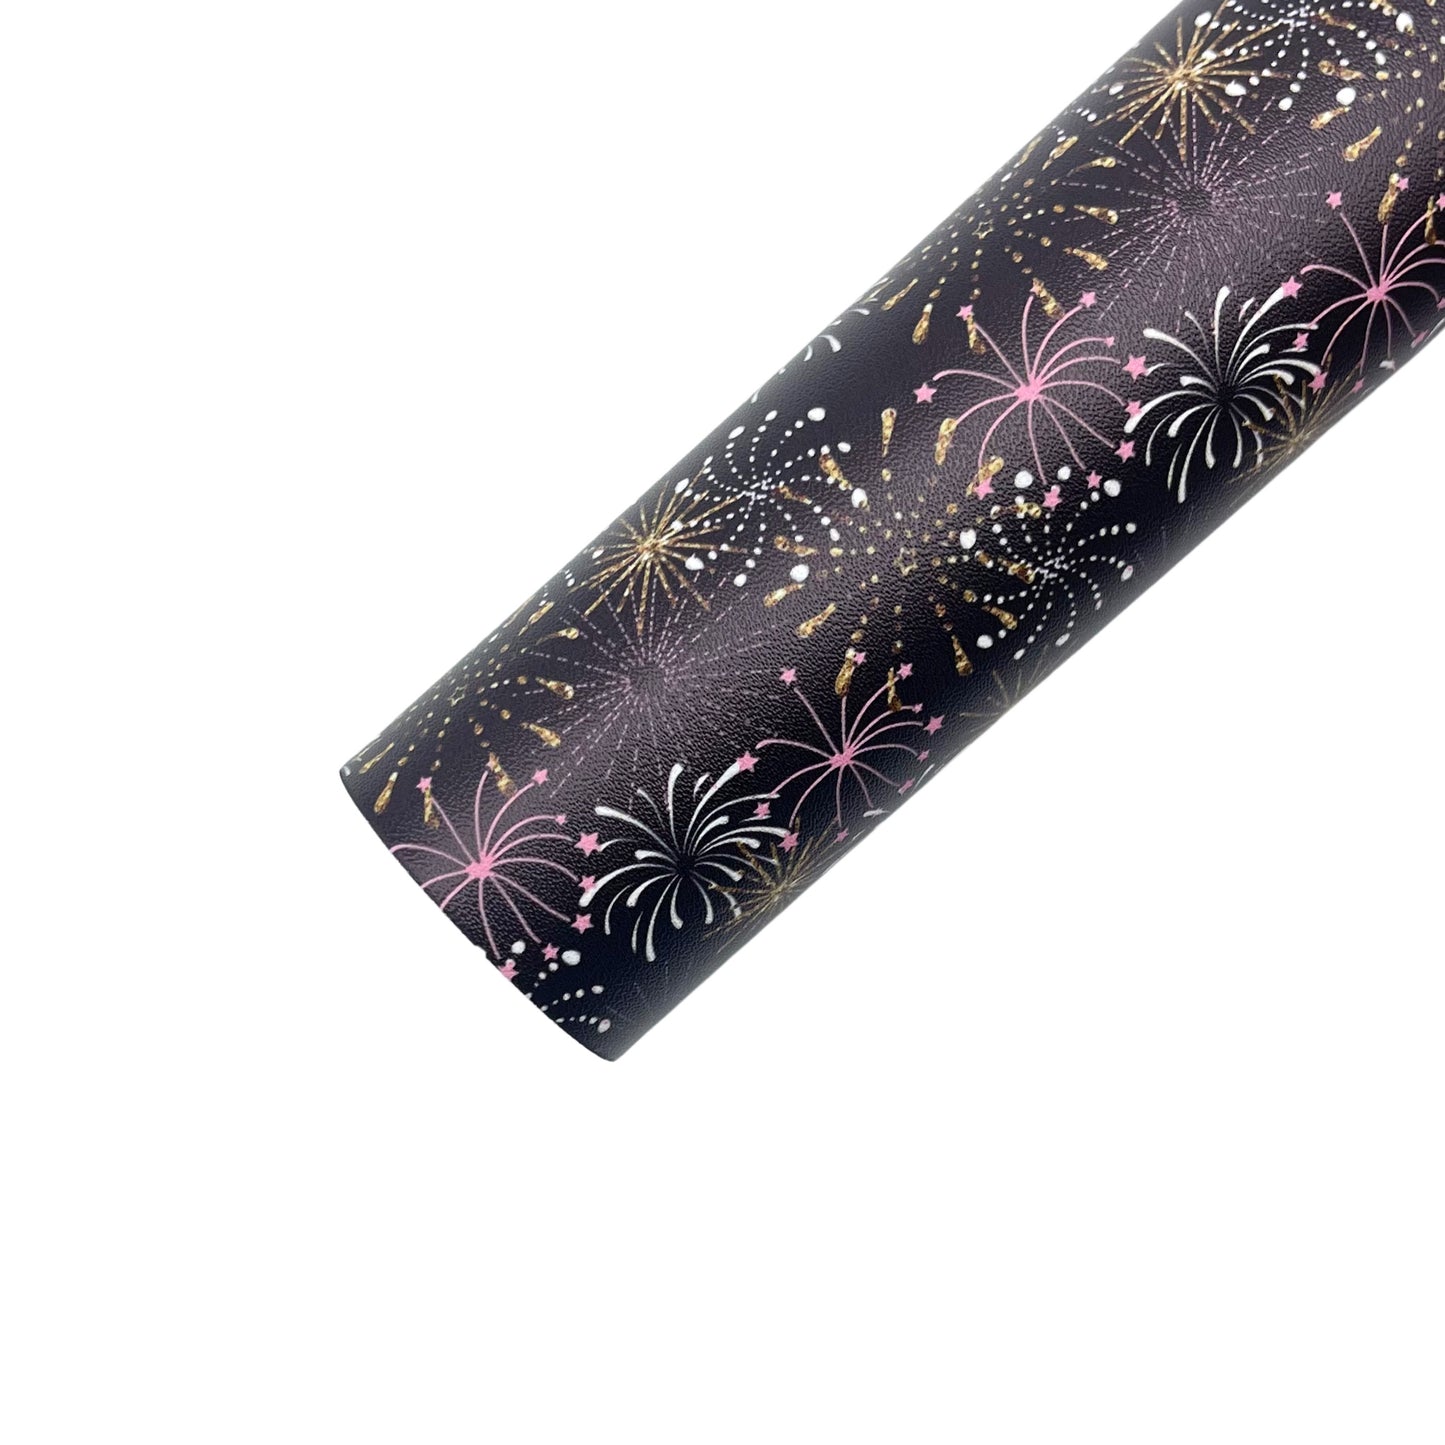 Black rolled faux leather sheet with pink, gold, and white firework new years pattern.